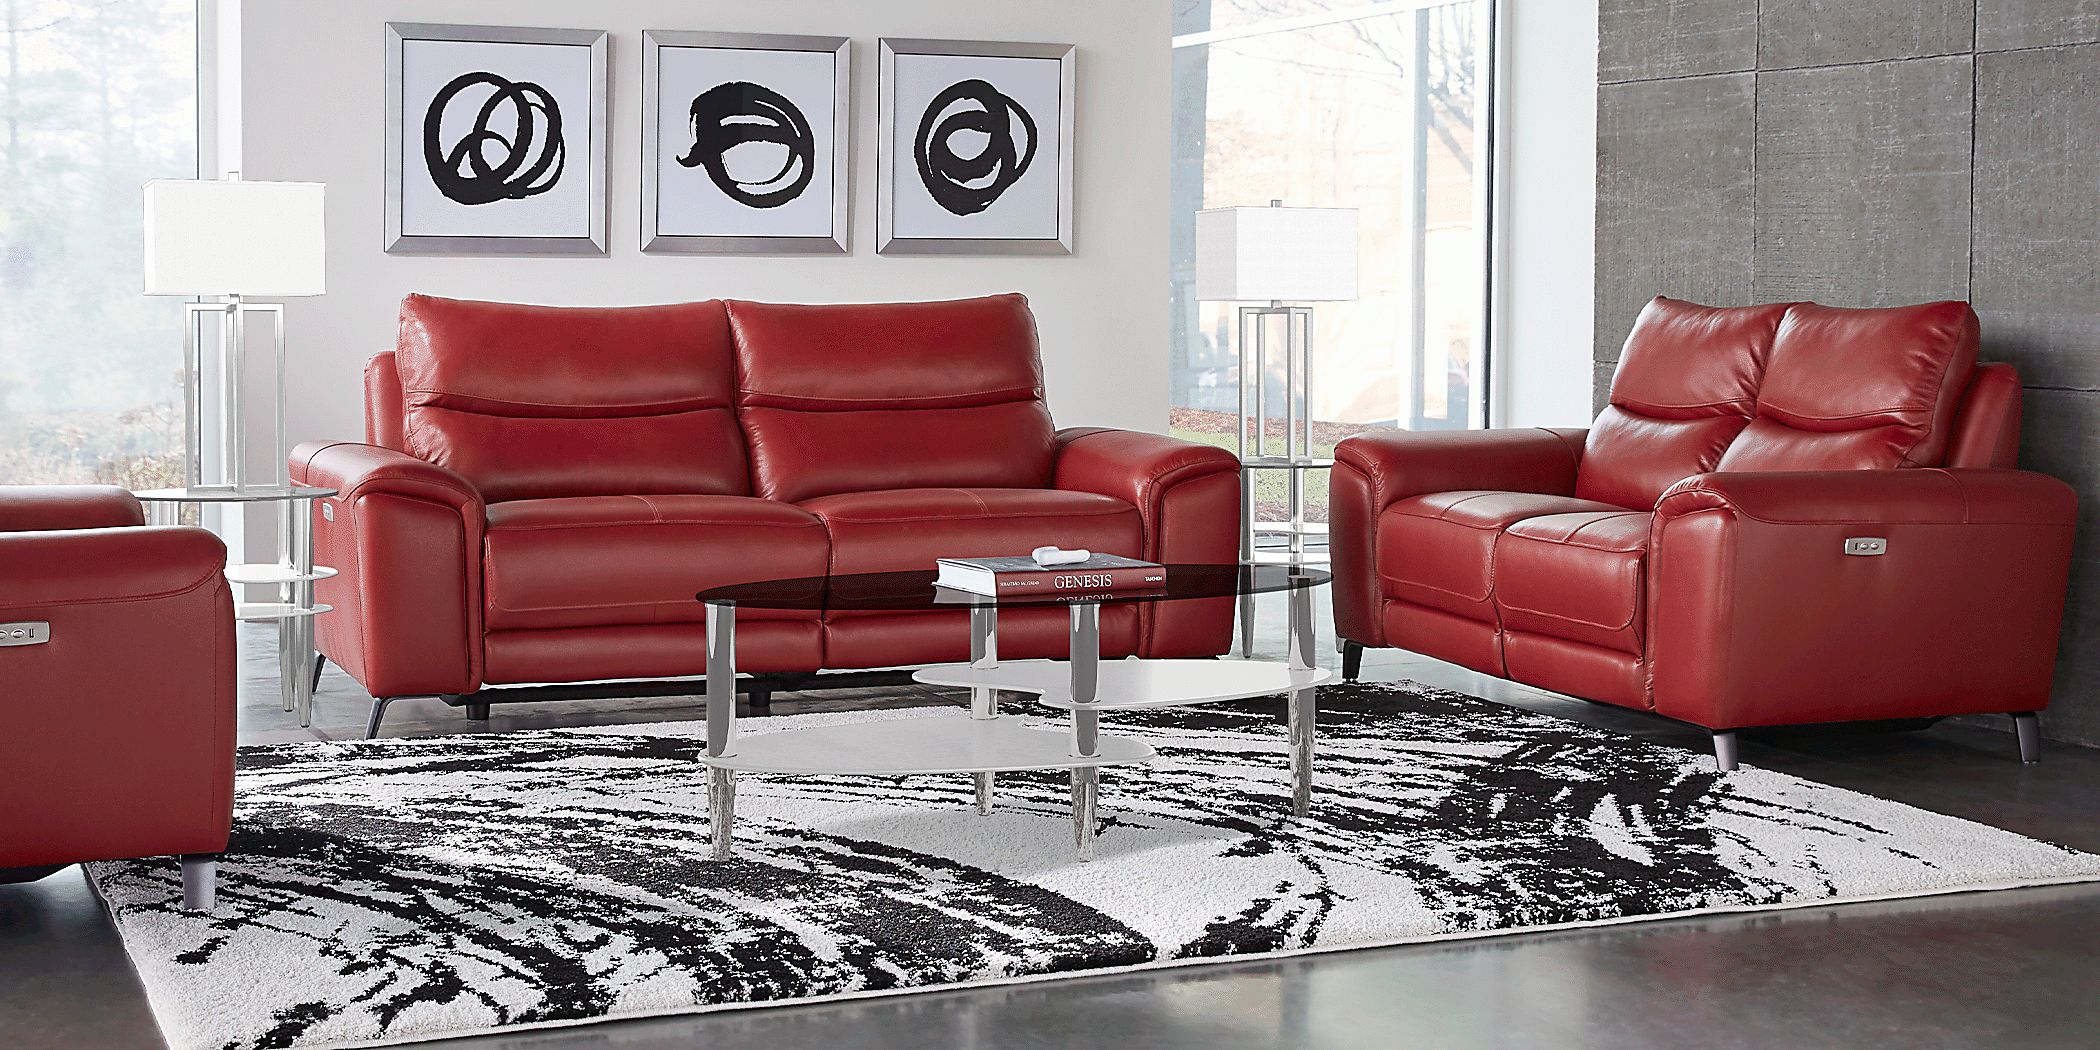 2Pc Contemporary Modern Pu-Leather Sofa and Loveseat Living Room Set in 3 Colors 